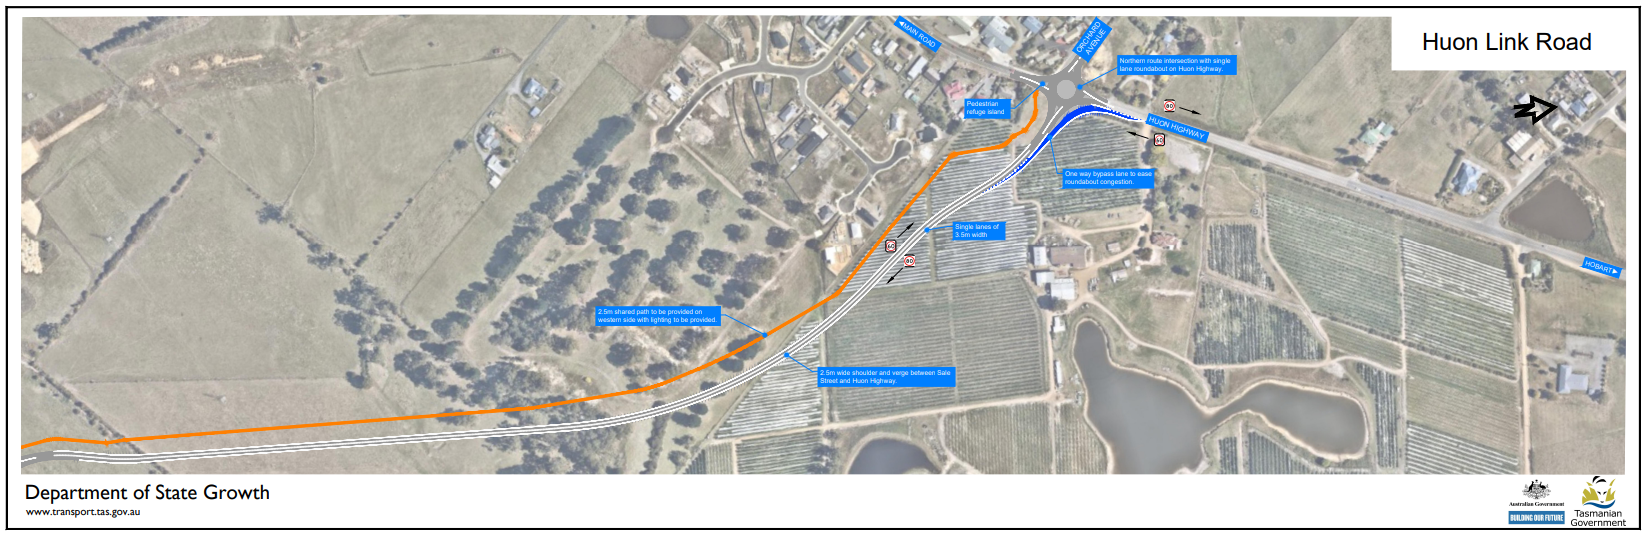 Huon Link Road Roll Plan preview 2 - July 2022